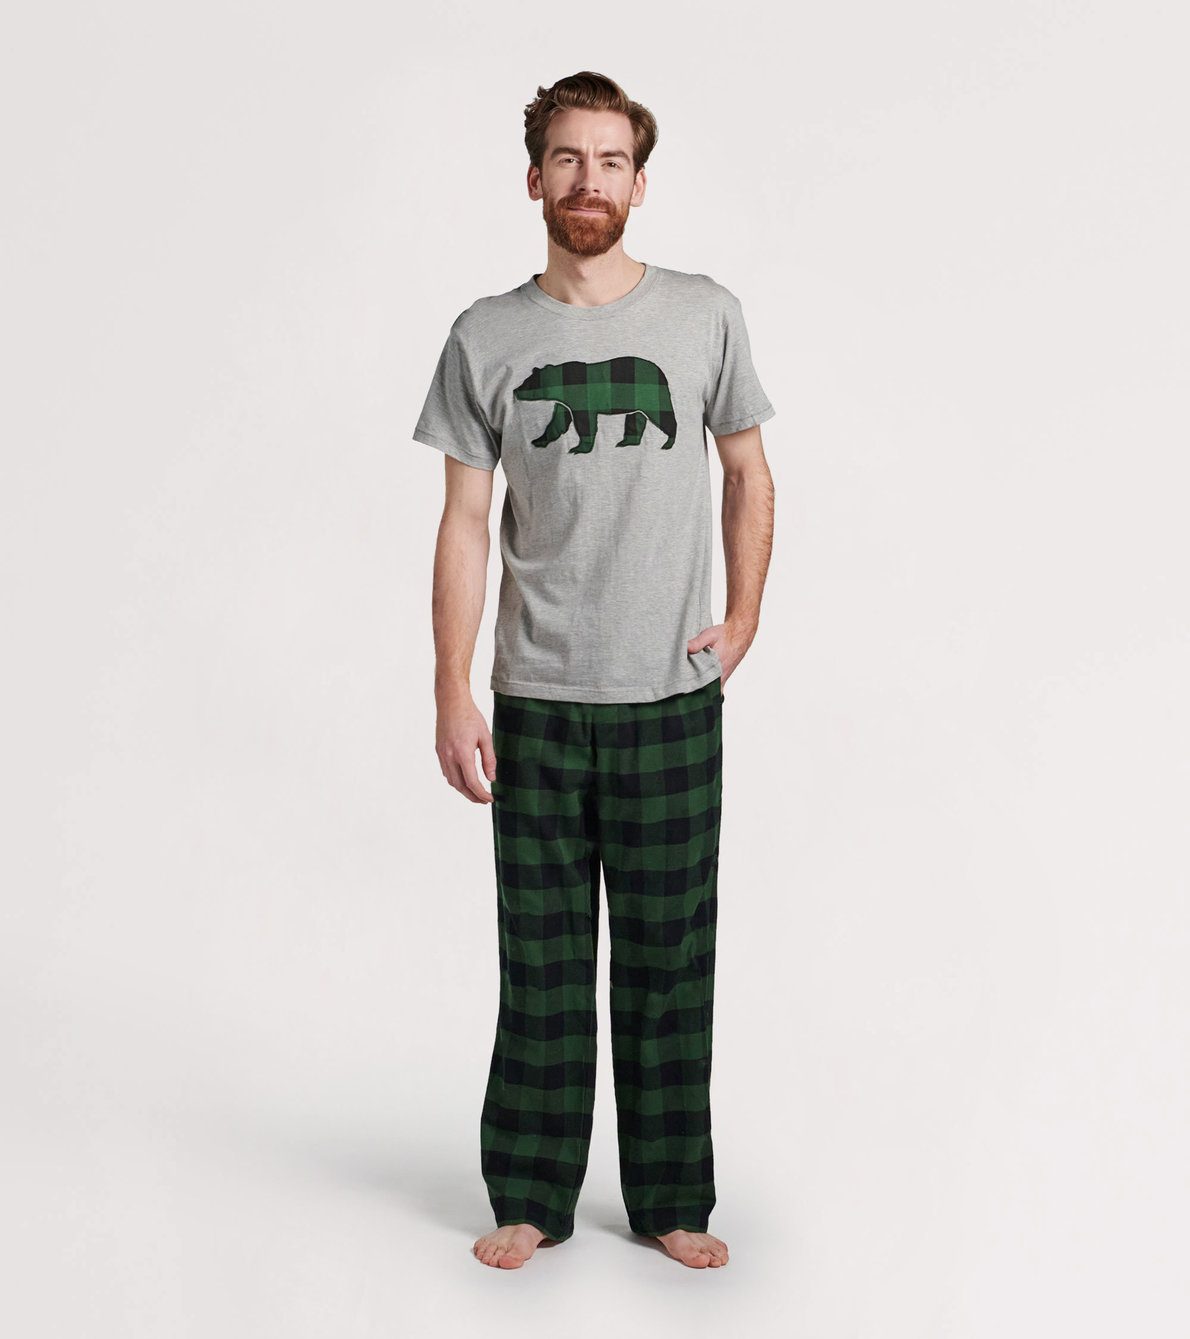 View larger image of Forest Green Plaid Men's Tee and Pants Pajama Separates